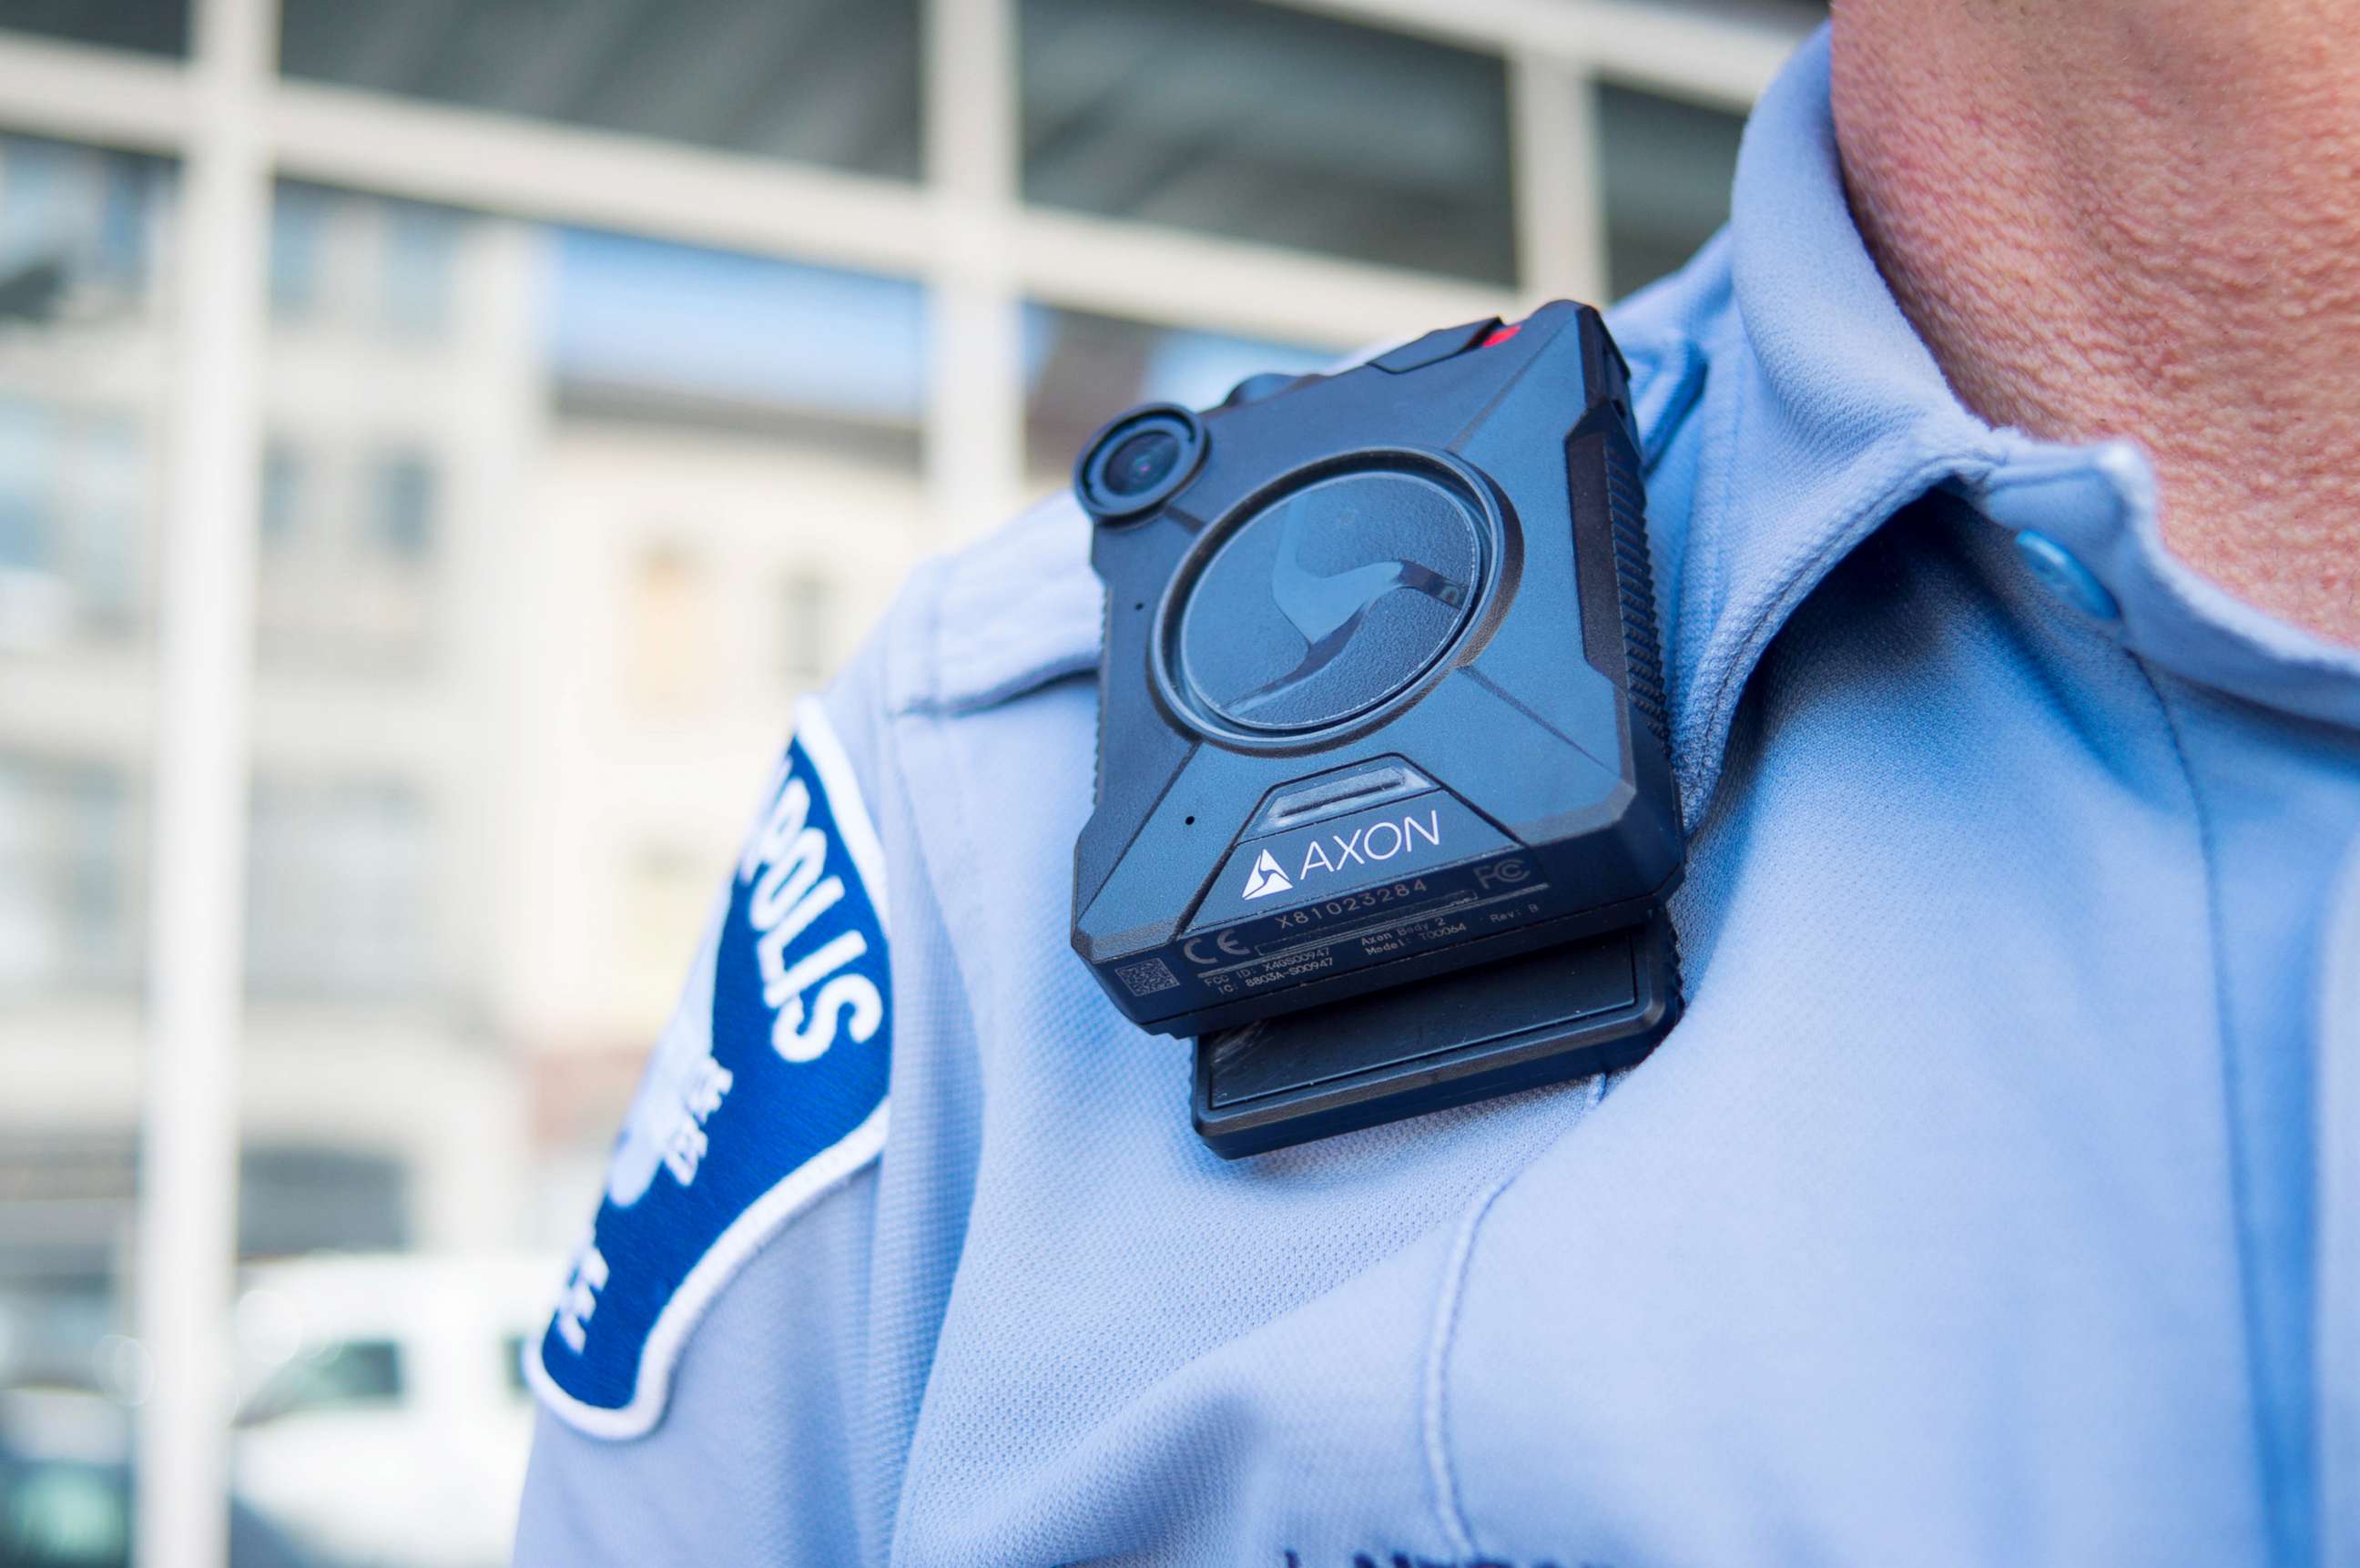 PHOTO: A police officer wears a body camera in this undated photo from the website of the Minneapolis Police Department.    